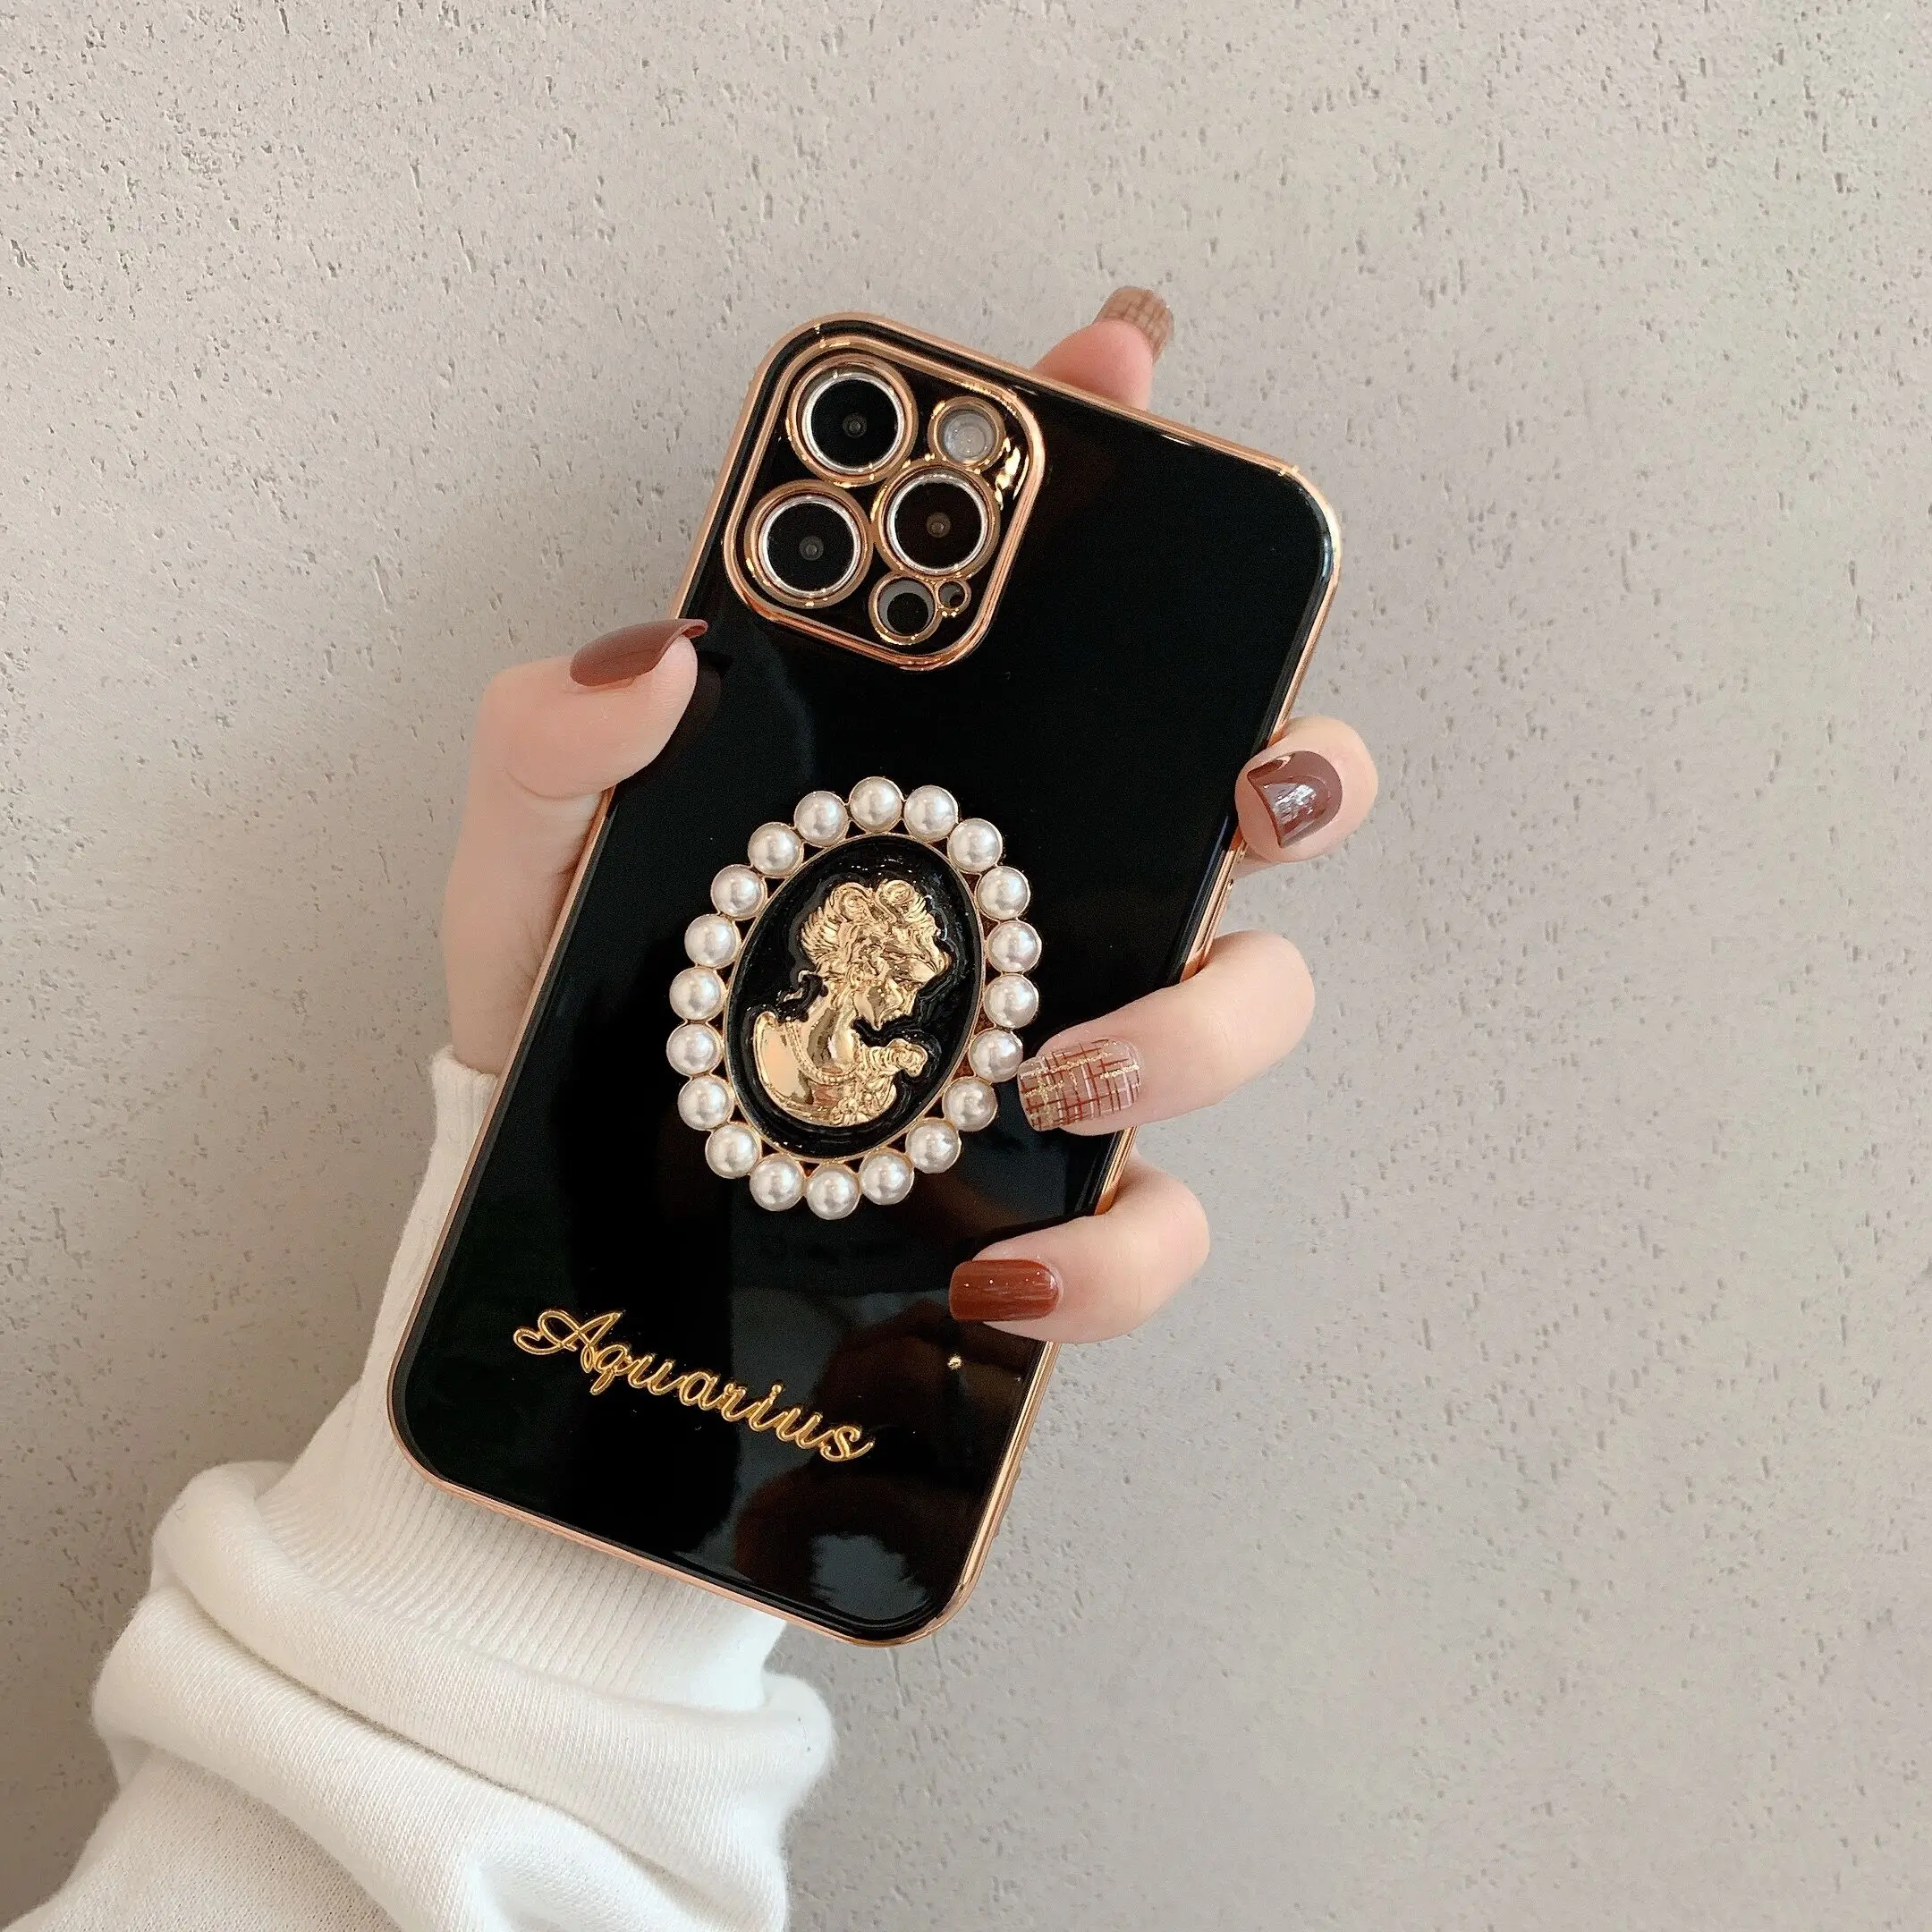 Versace Coque Cover Case For Apple iPhone 15 Pro Max 14 13 12 11 /2